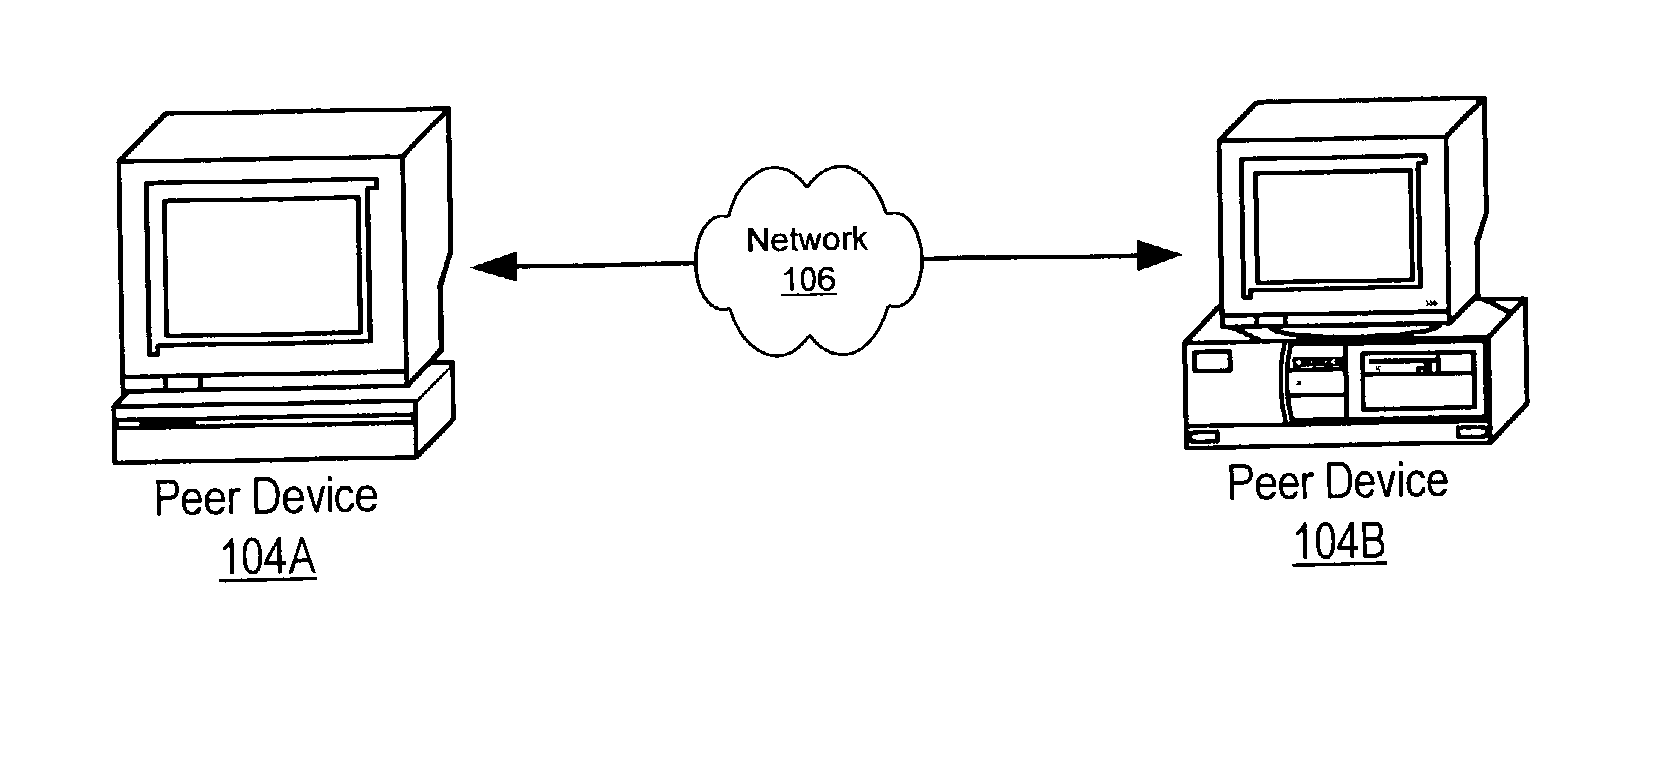 Presence detection using distributed indexes in peer-to-peer networks